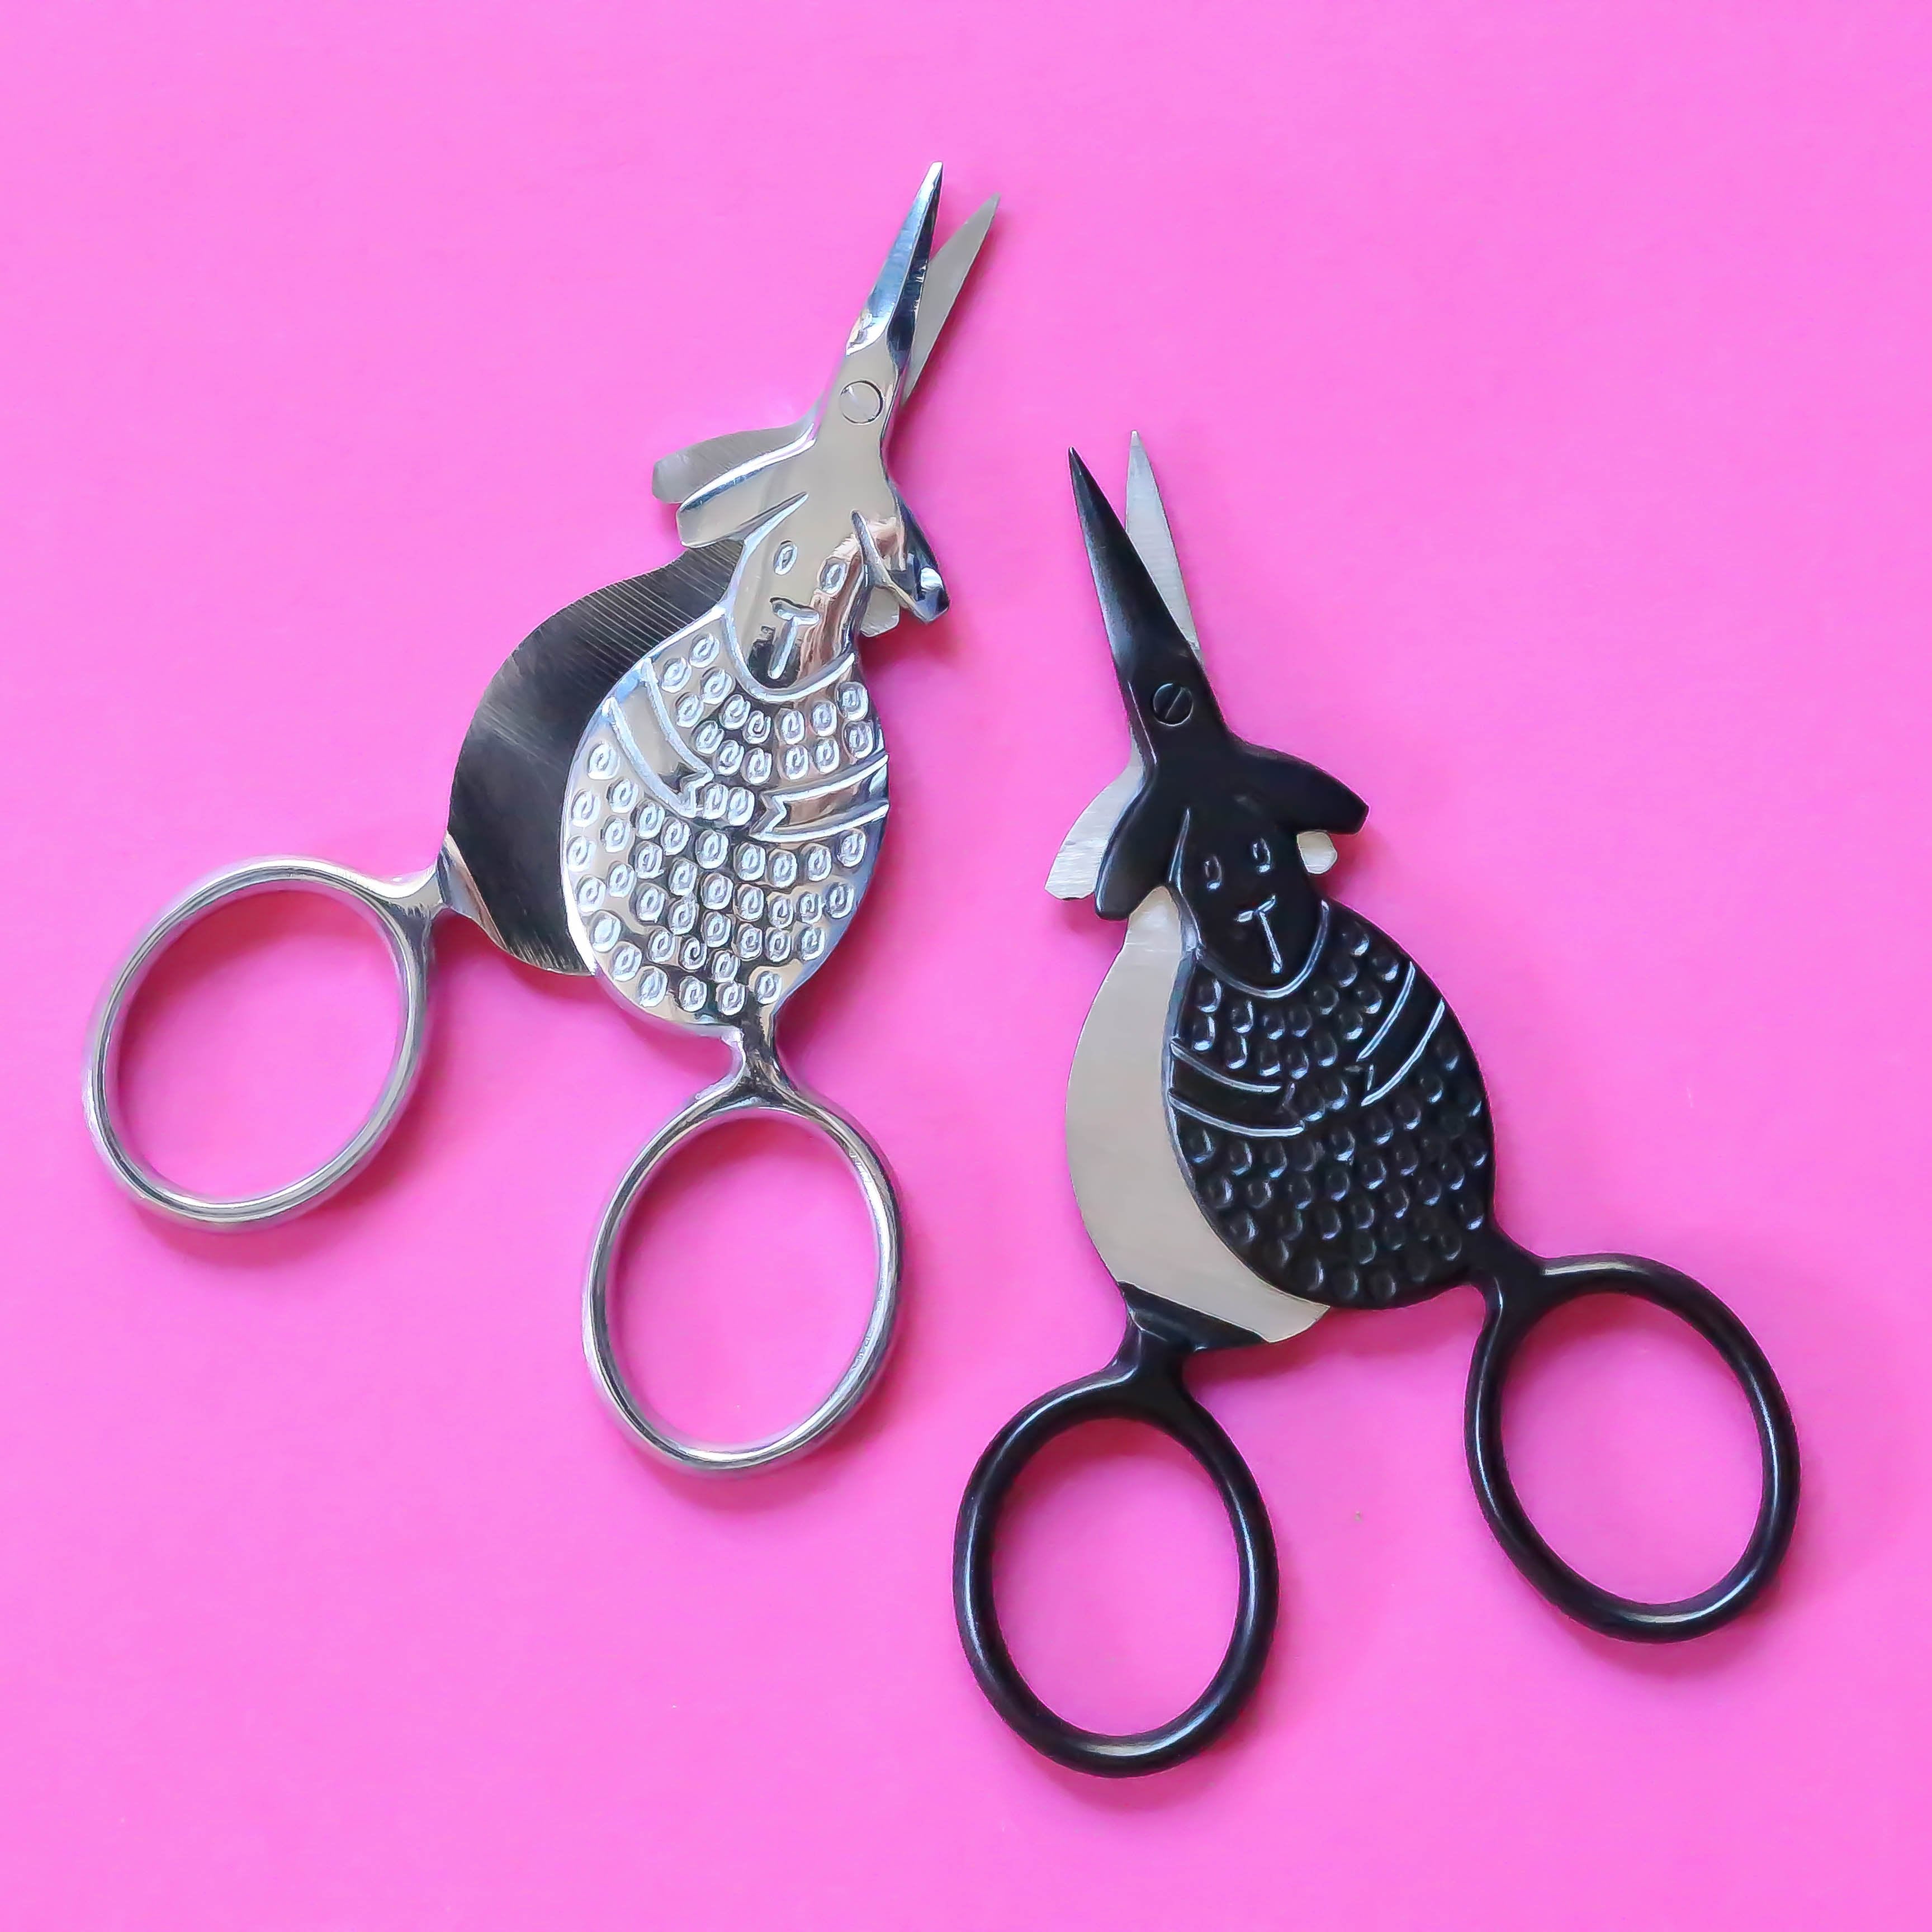 Black Sheep Embroidery Scissors open with silver sheep scissors